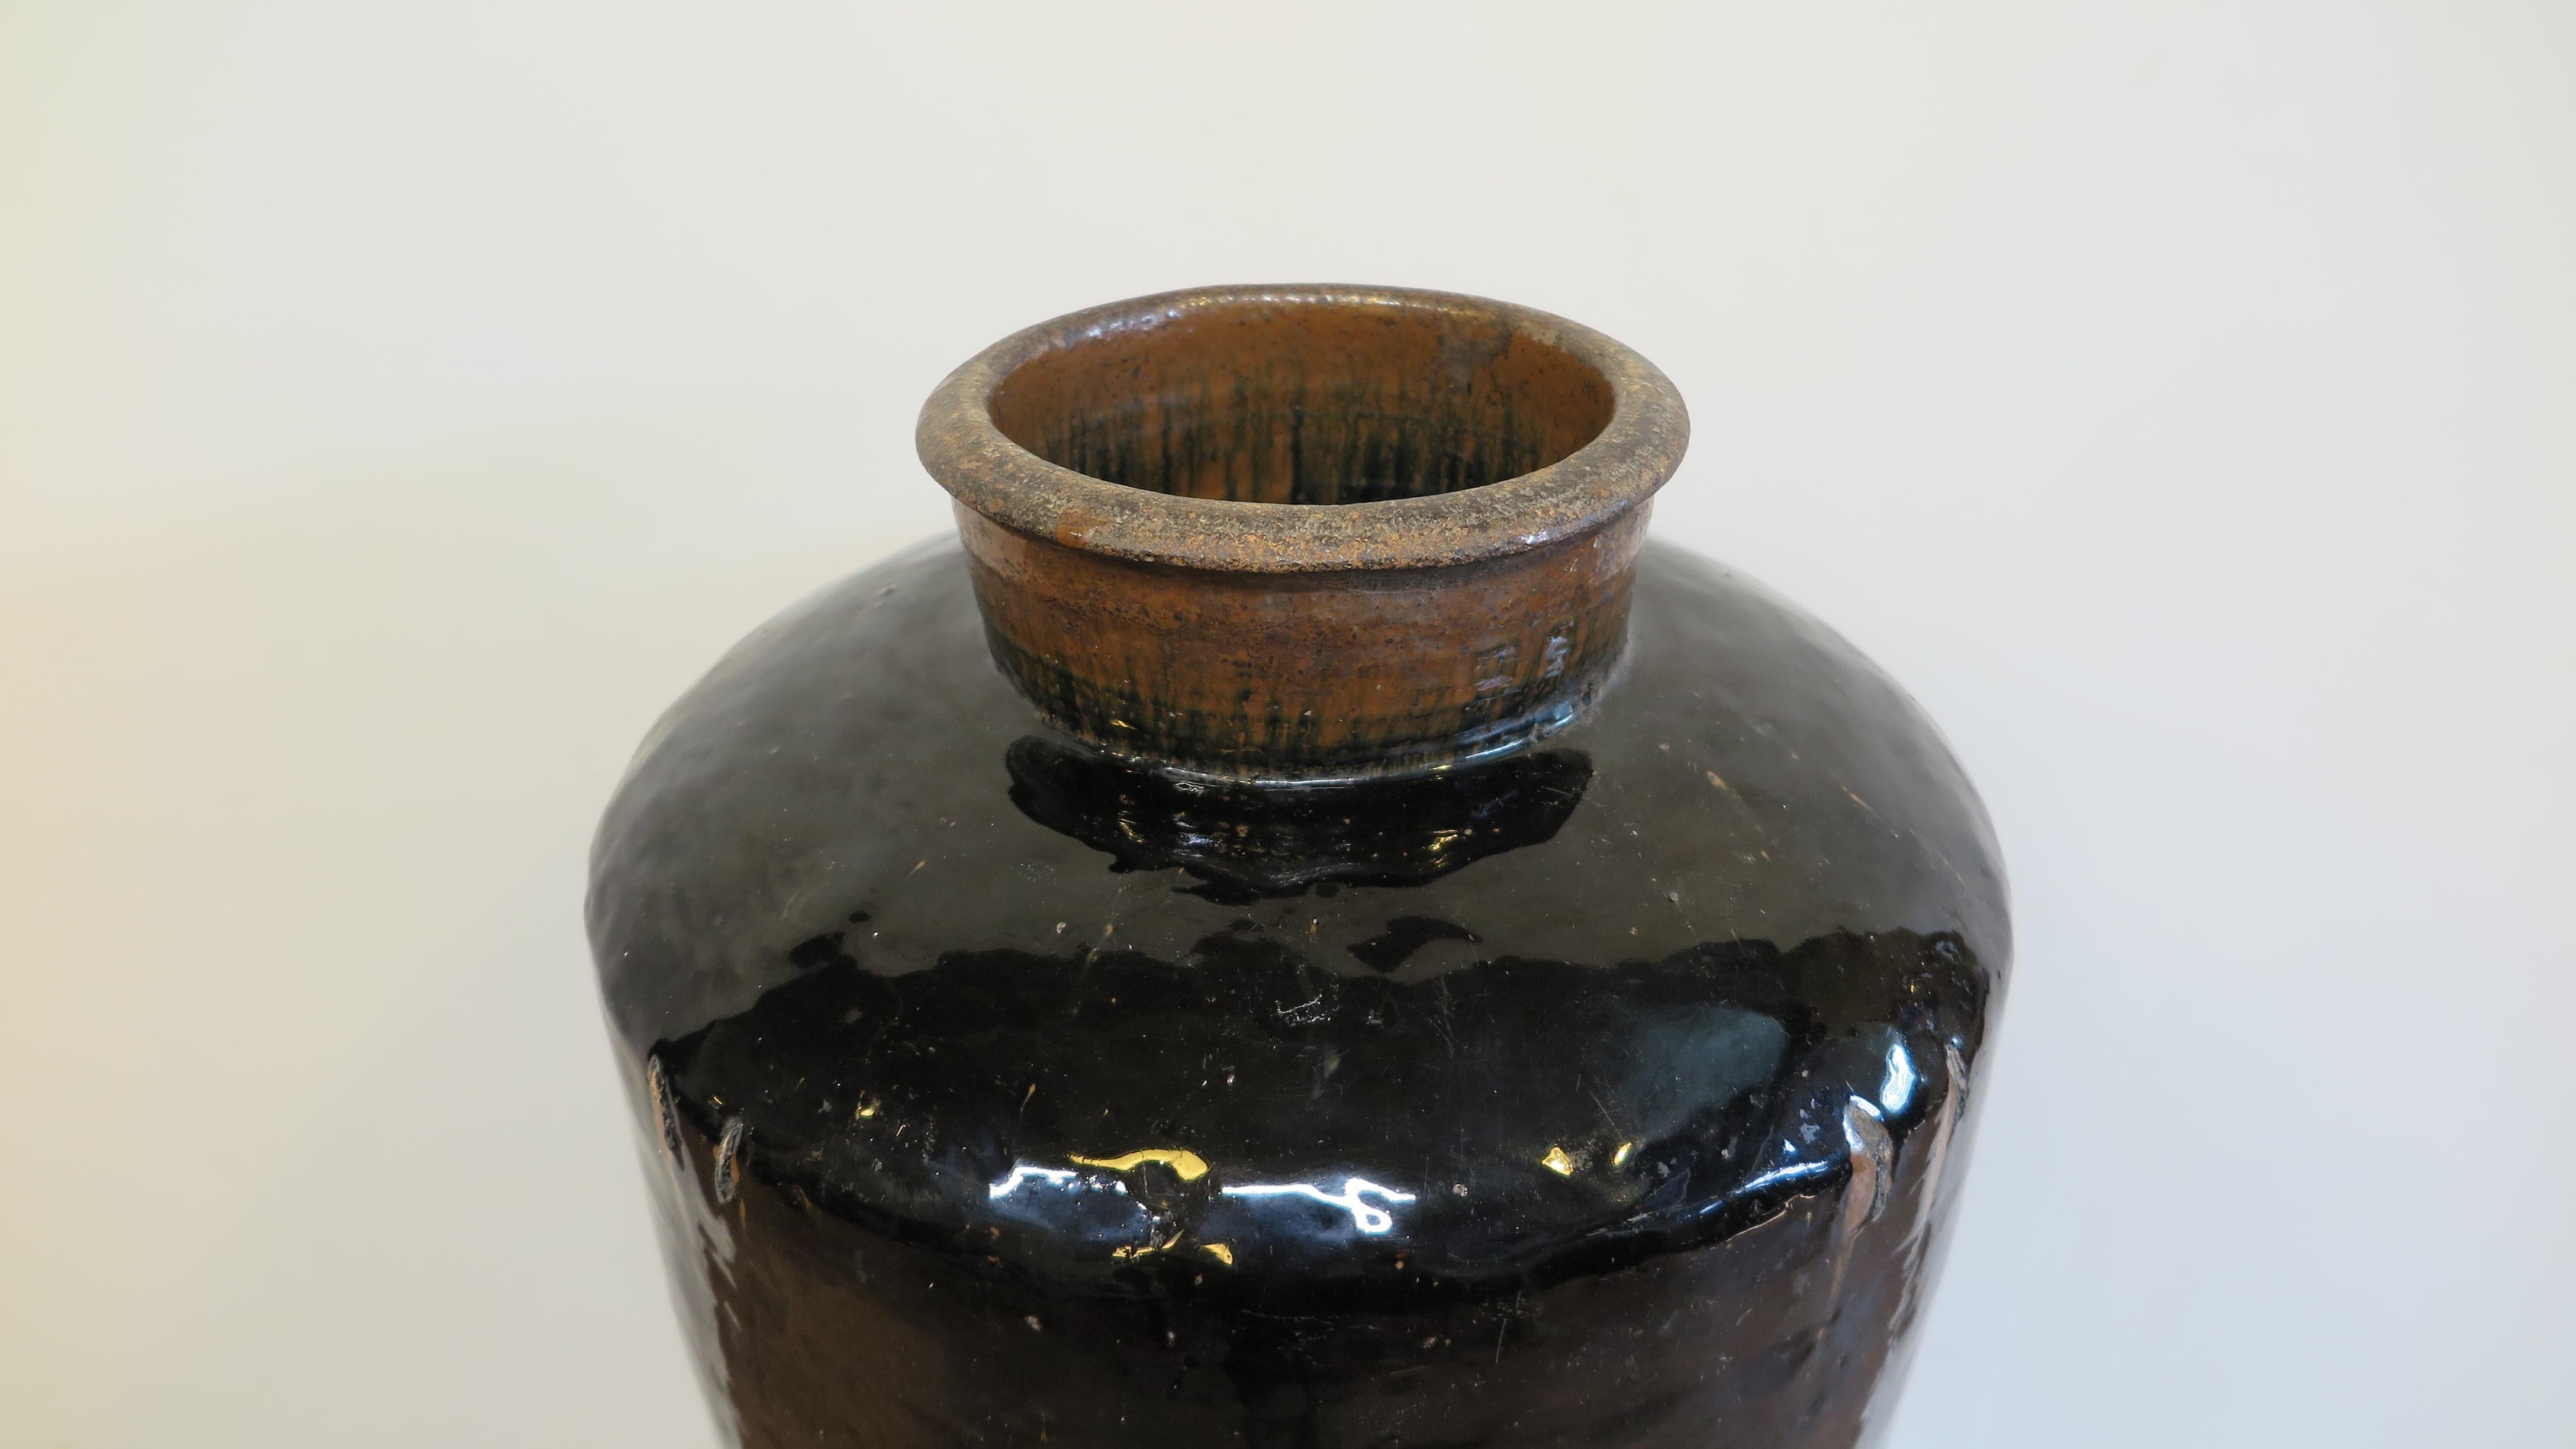 Chinese earthen ware storage jar. 19th century stoneware large black glaze storage jar. Excellent shape having wide raised mouth opening with flared rim spout on domed edged top tapering to narrowed bottom. The black glaze has significant depth